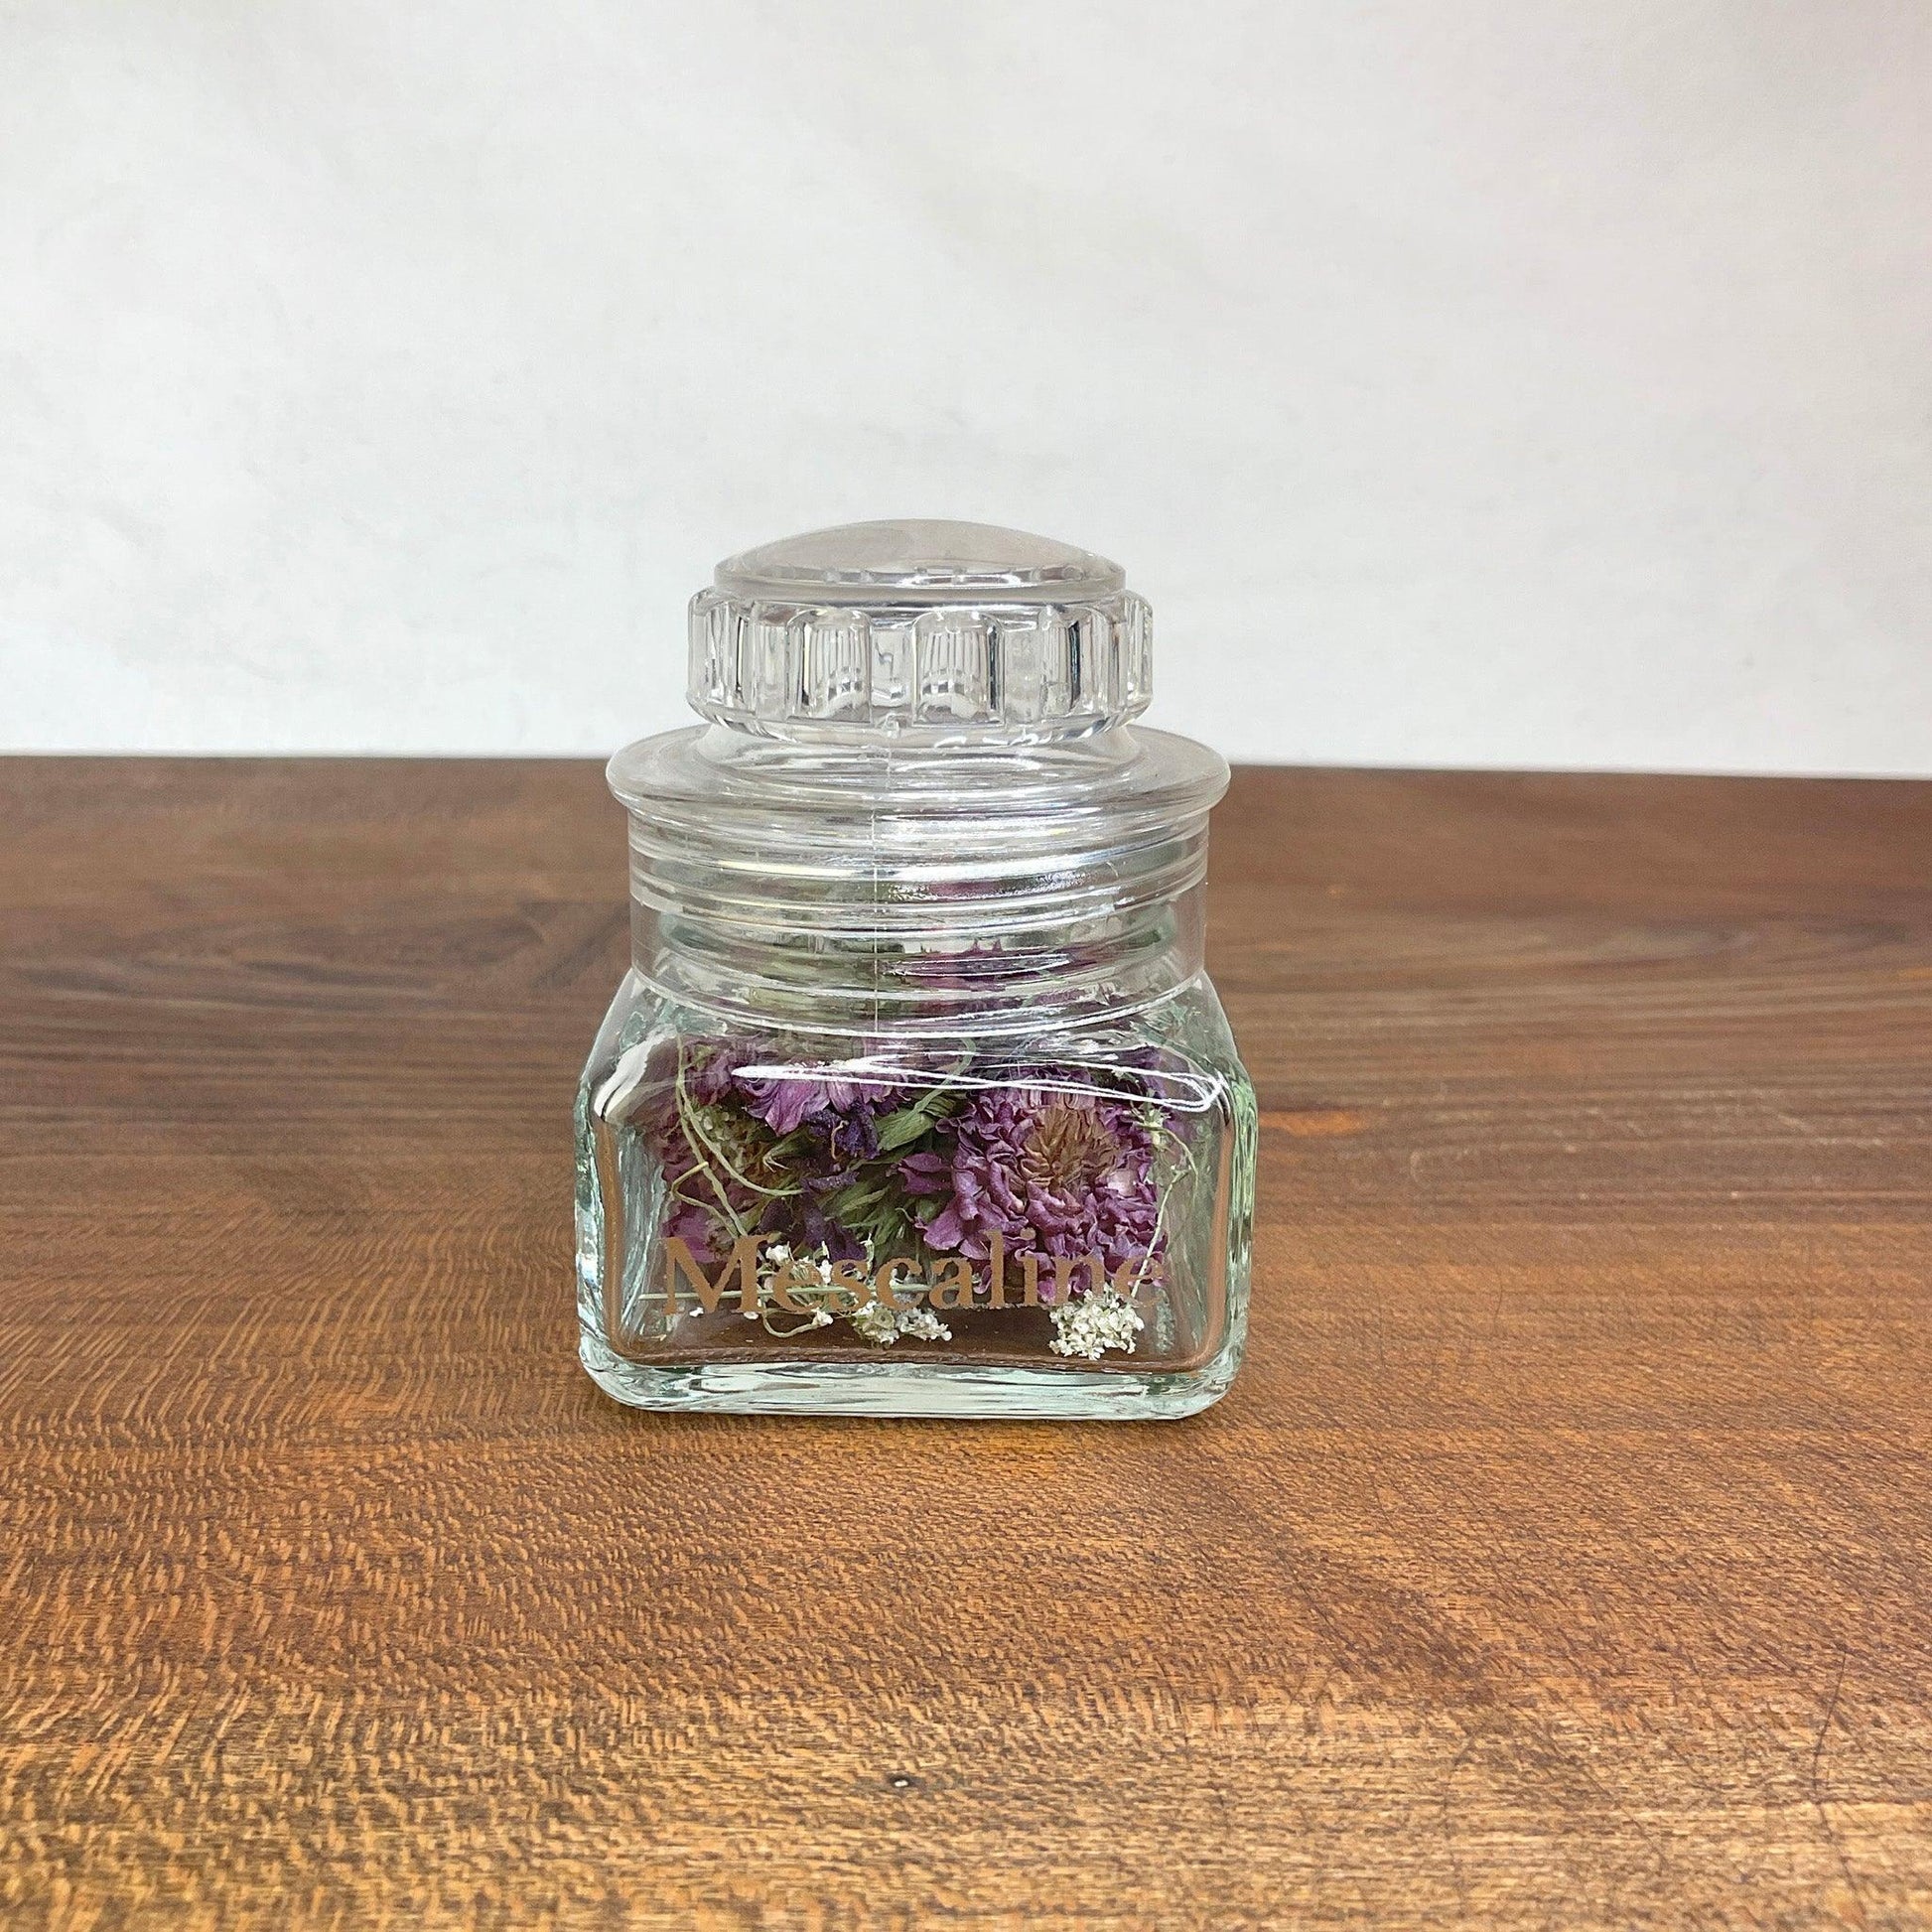 Mescaline Apothecary Jar - Offensively Domestic